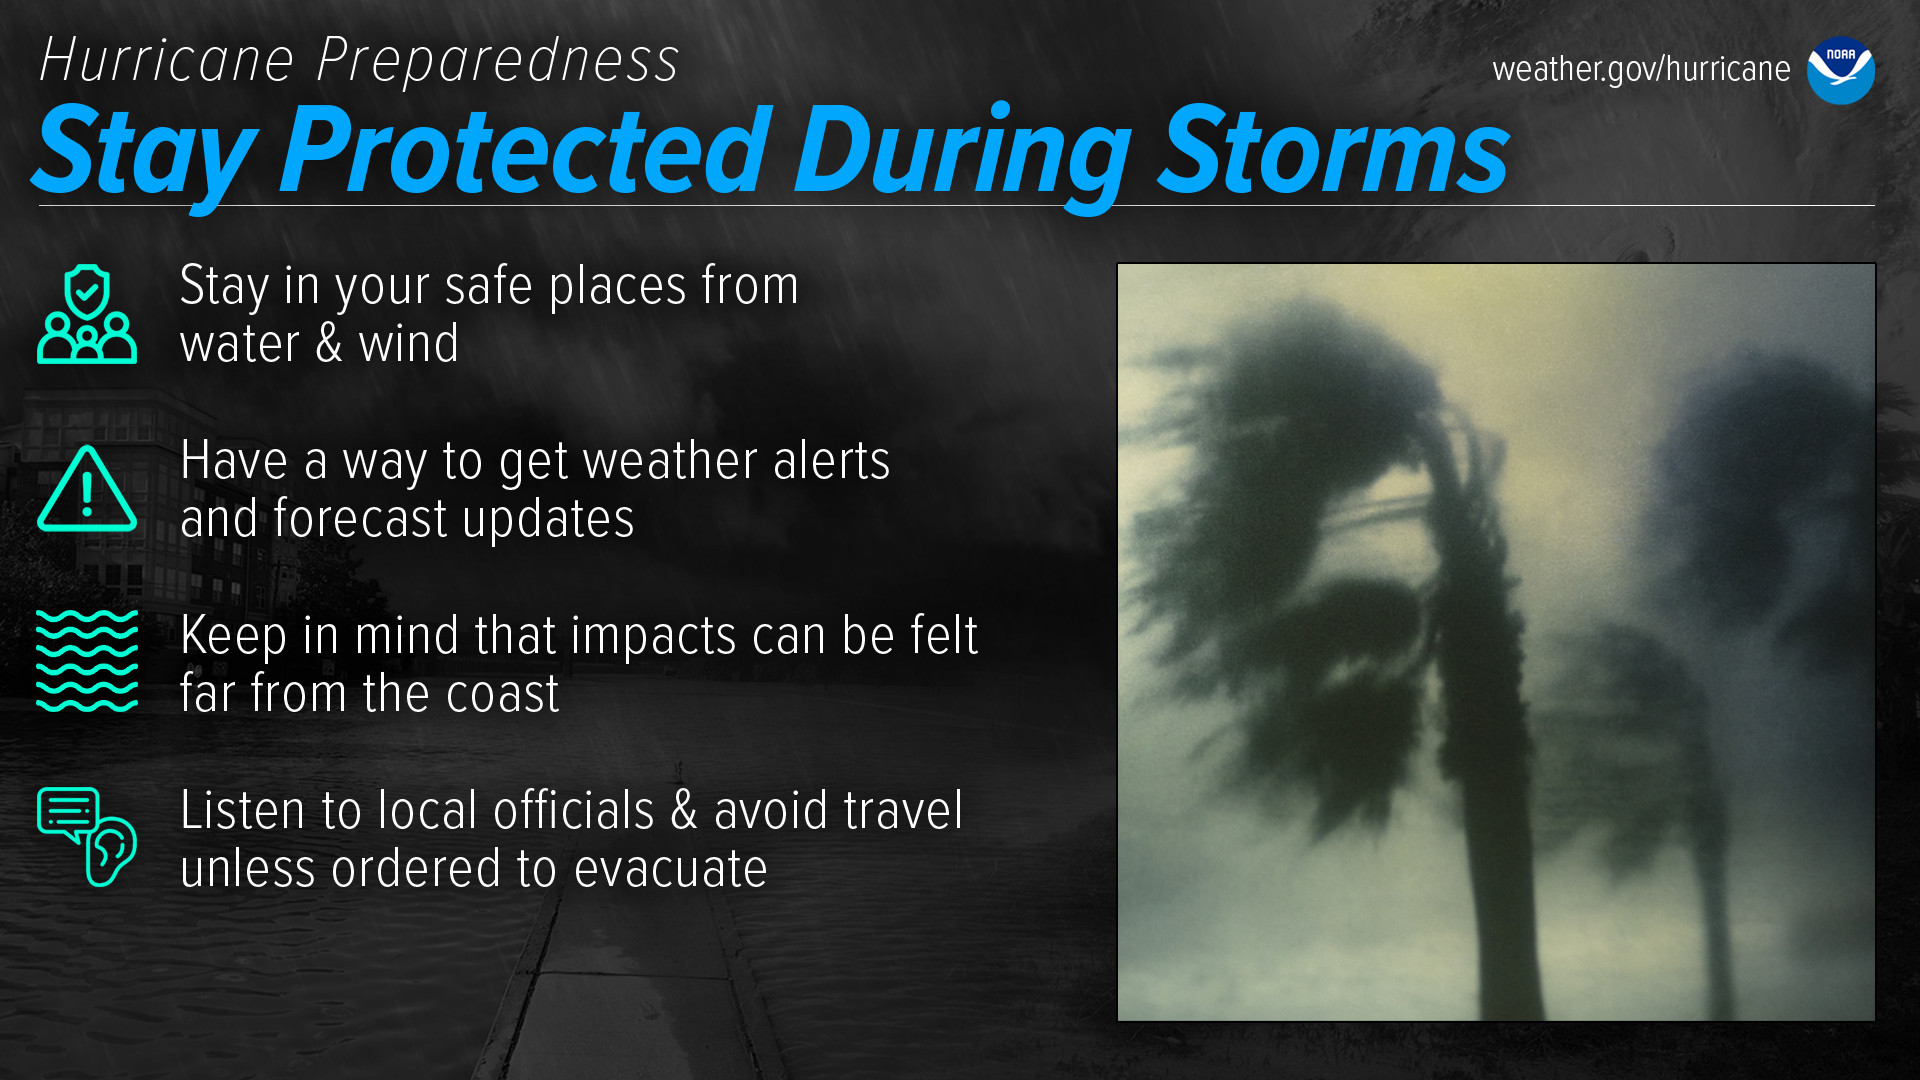 Hurricane Preparedness: Stay protected during storms. Stay in your safe places from water & wind. Have a way to get weather alerts and forecast updates. Keep in mind that impacts can be felt far from the coast. Listen to local officials & avoid travel unless ordered to evacuate.